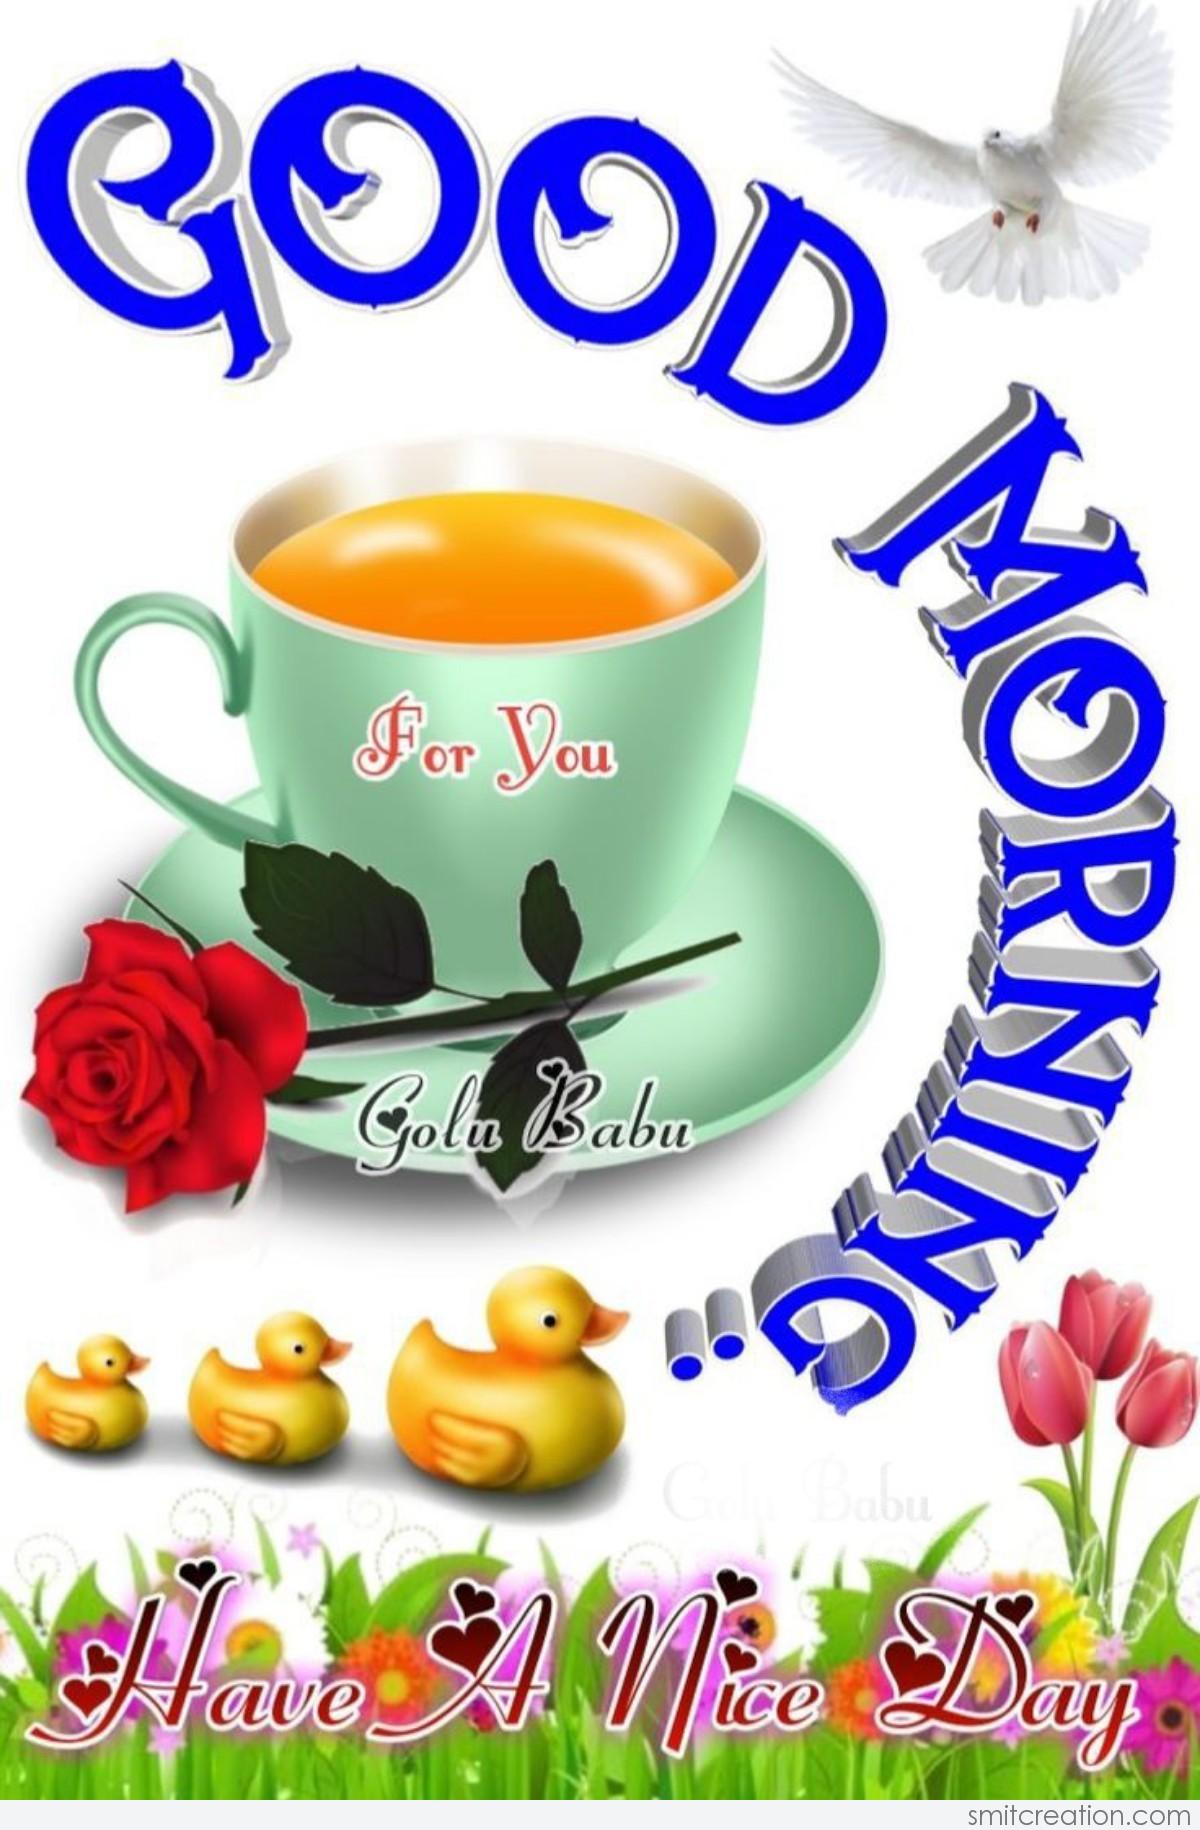 Good Morning Coffee Pictures and Graphics - SmitCreation.com